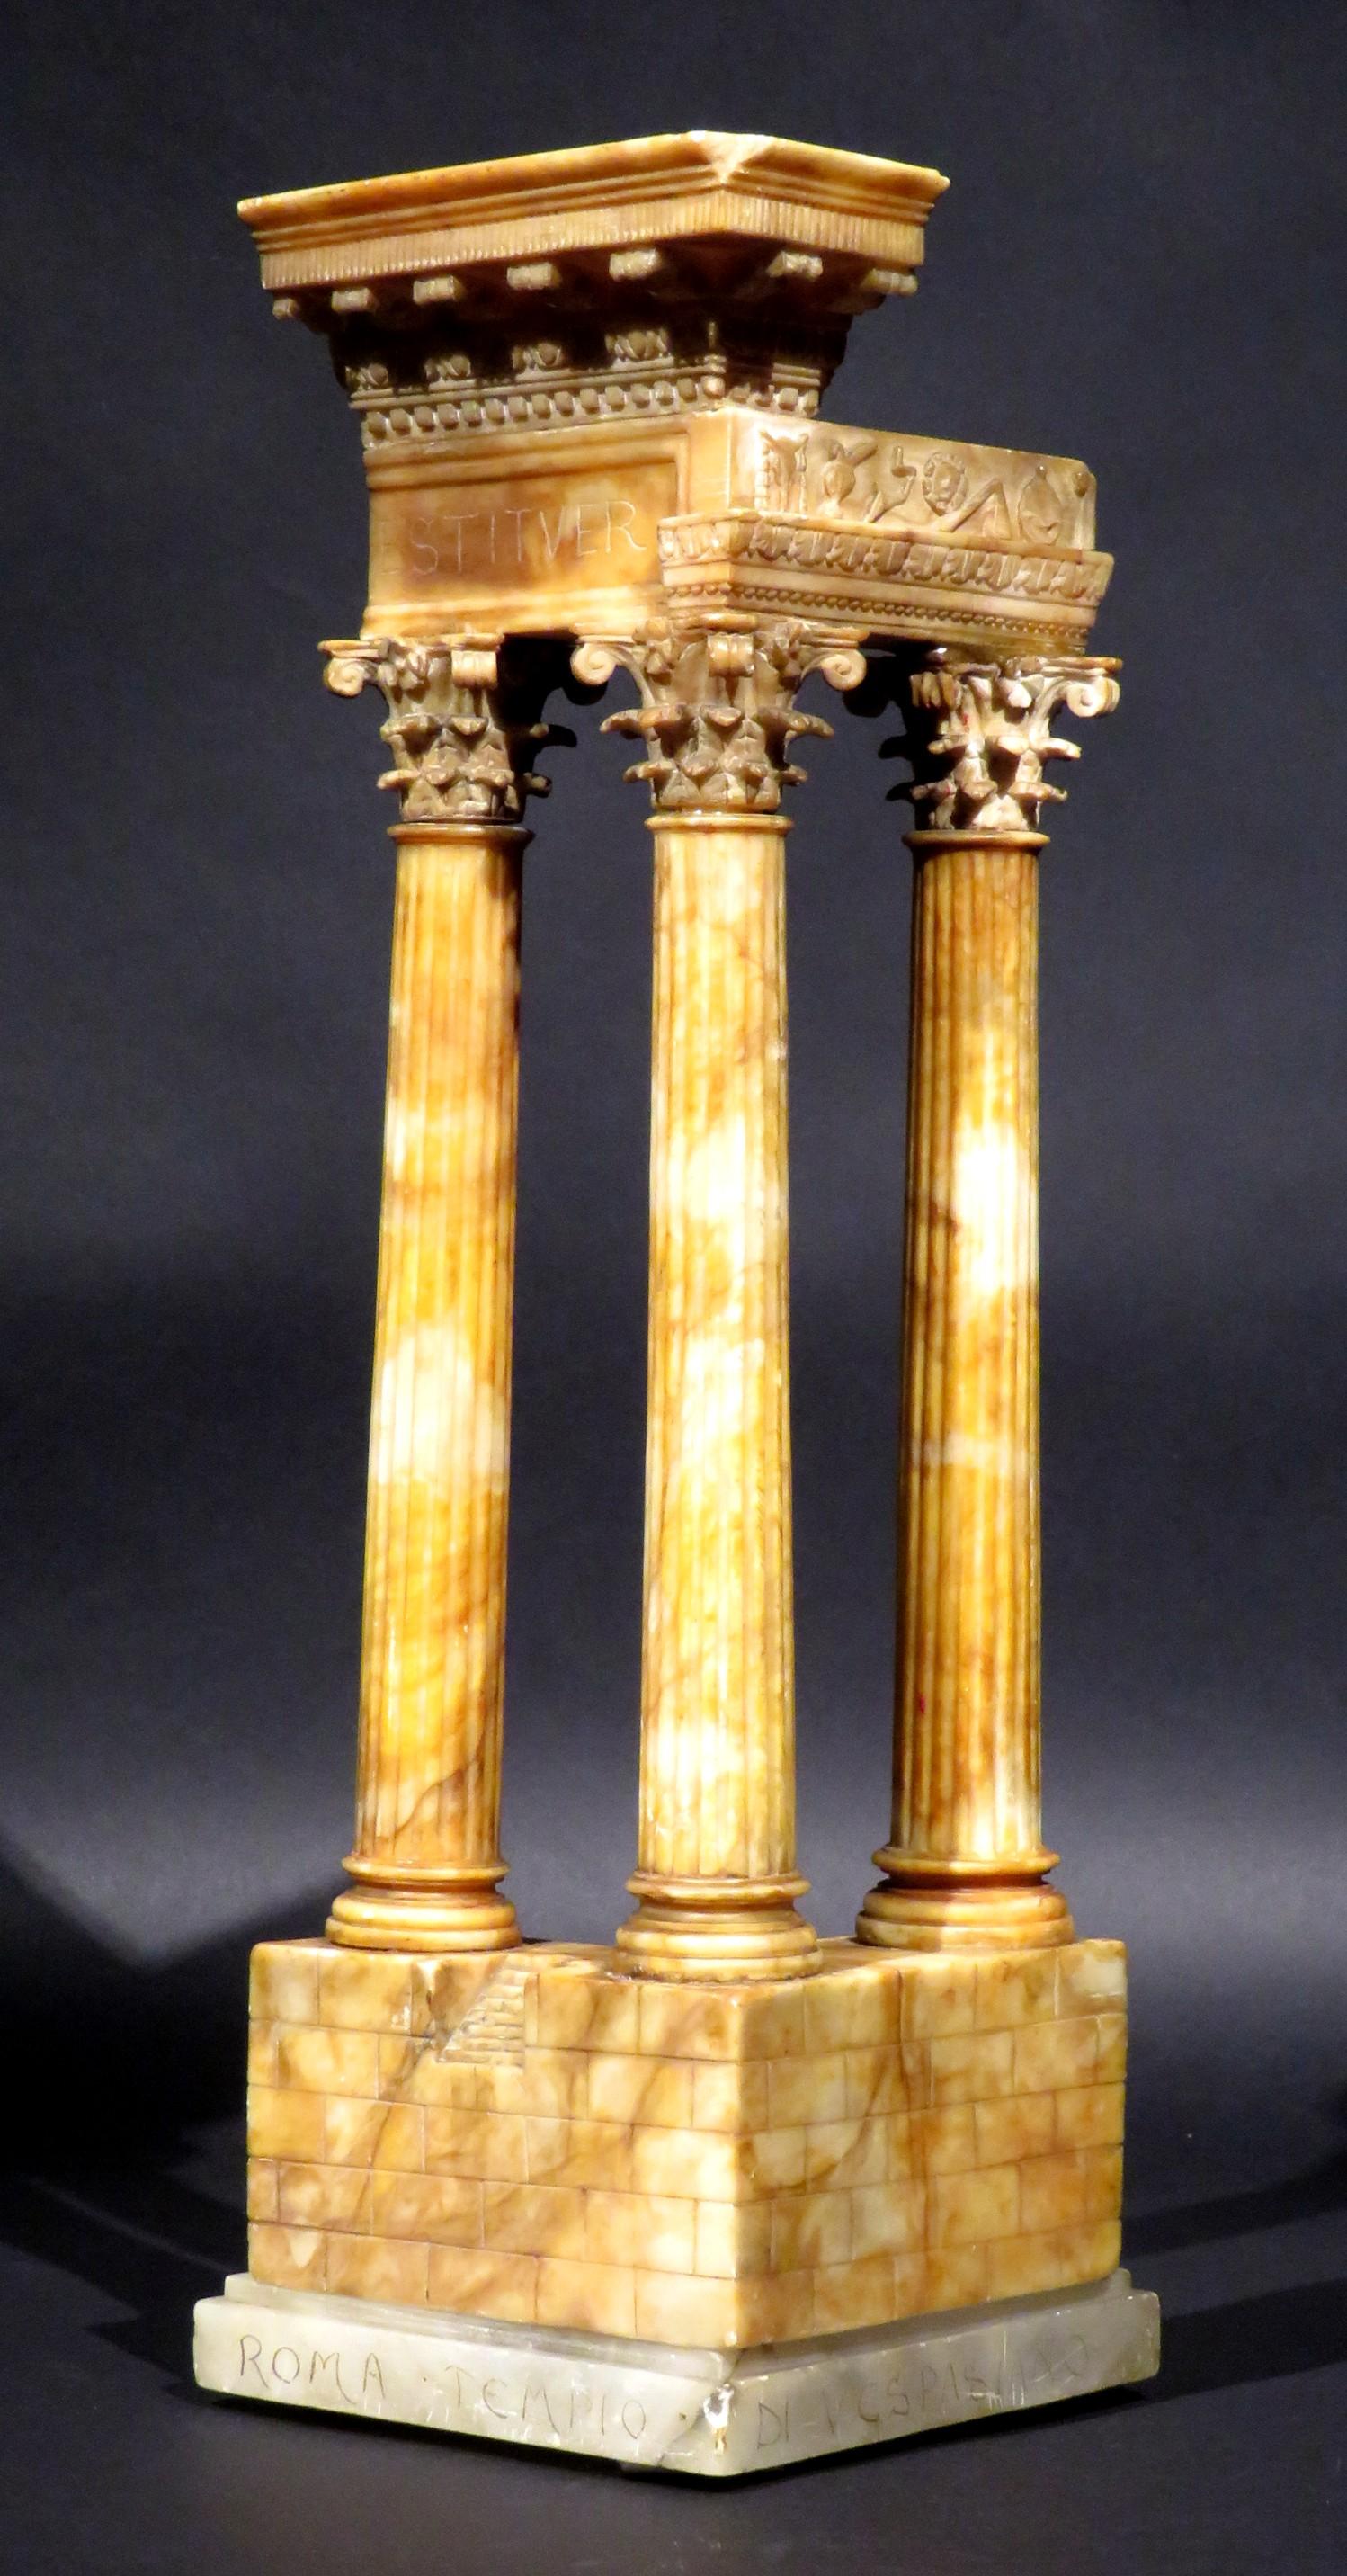 The large & finely sculpted alabaster structure showing a trio of fluted columns terminating to finely carved Corinthian capitals, supporting an entablature with a carved frieze illustrating symbols relating to the priestly Collegia of Rome. Raised